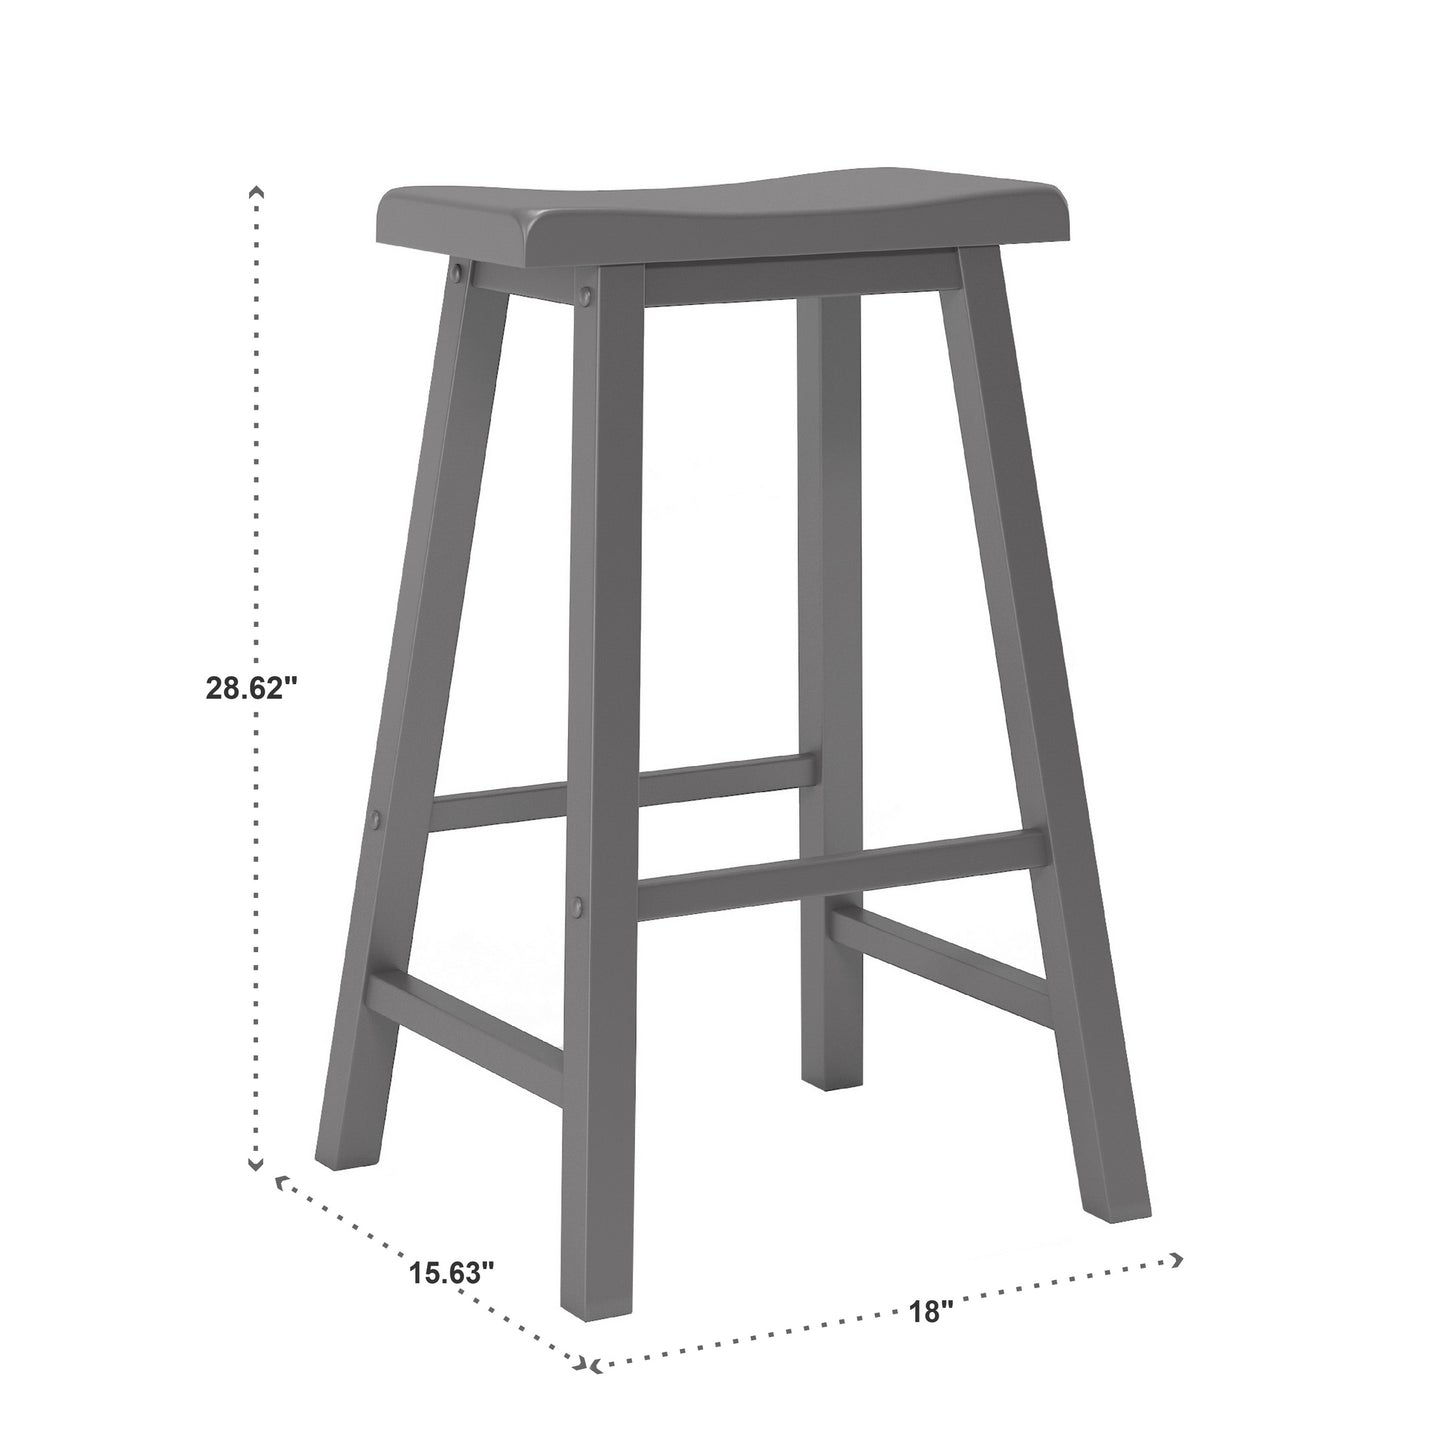 Saddle Seat 29-inch Bar Height Backless Stools (Set of 2) - Frost Grey Finish